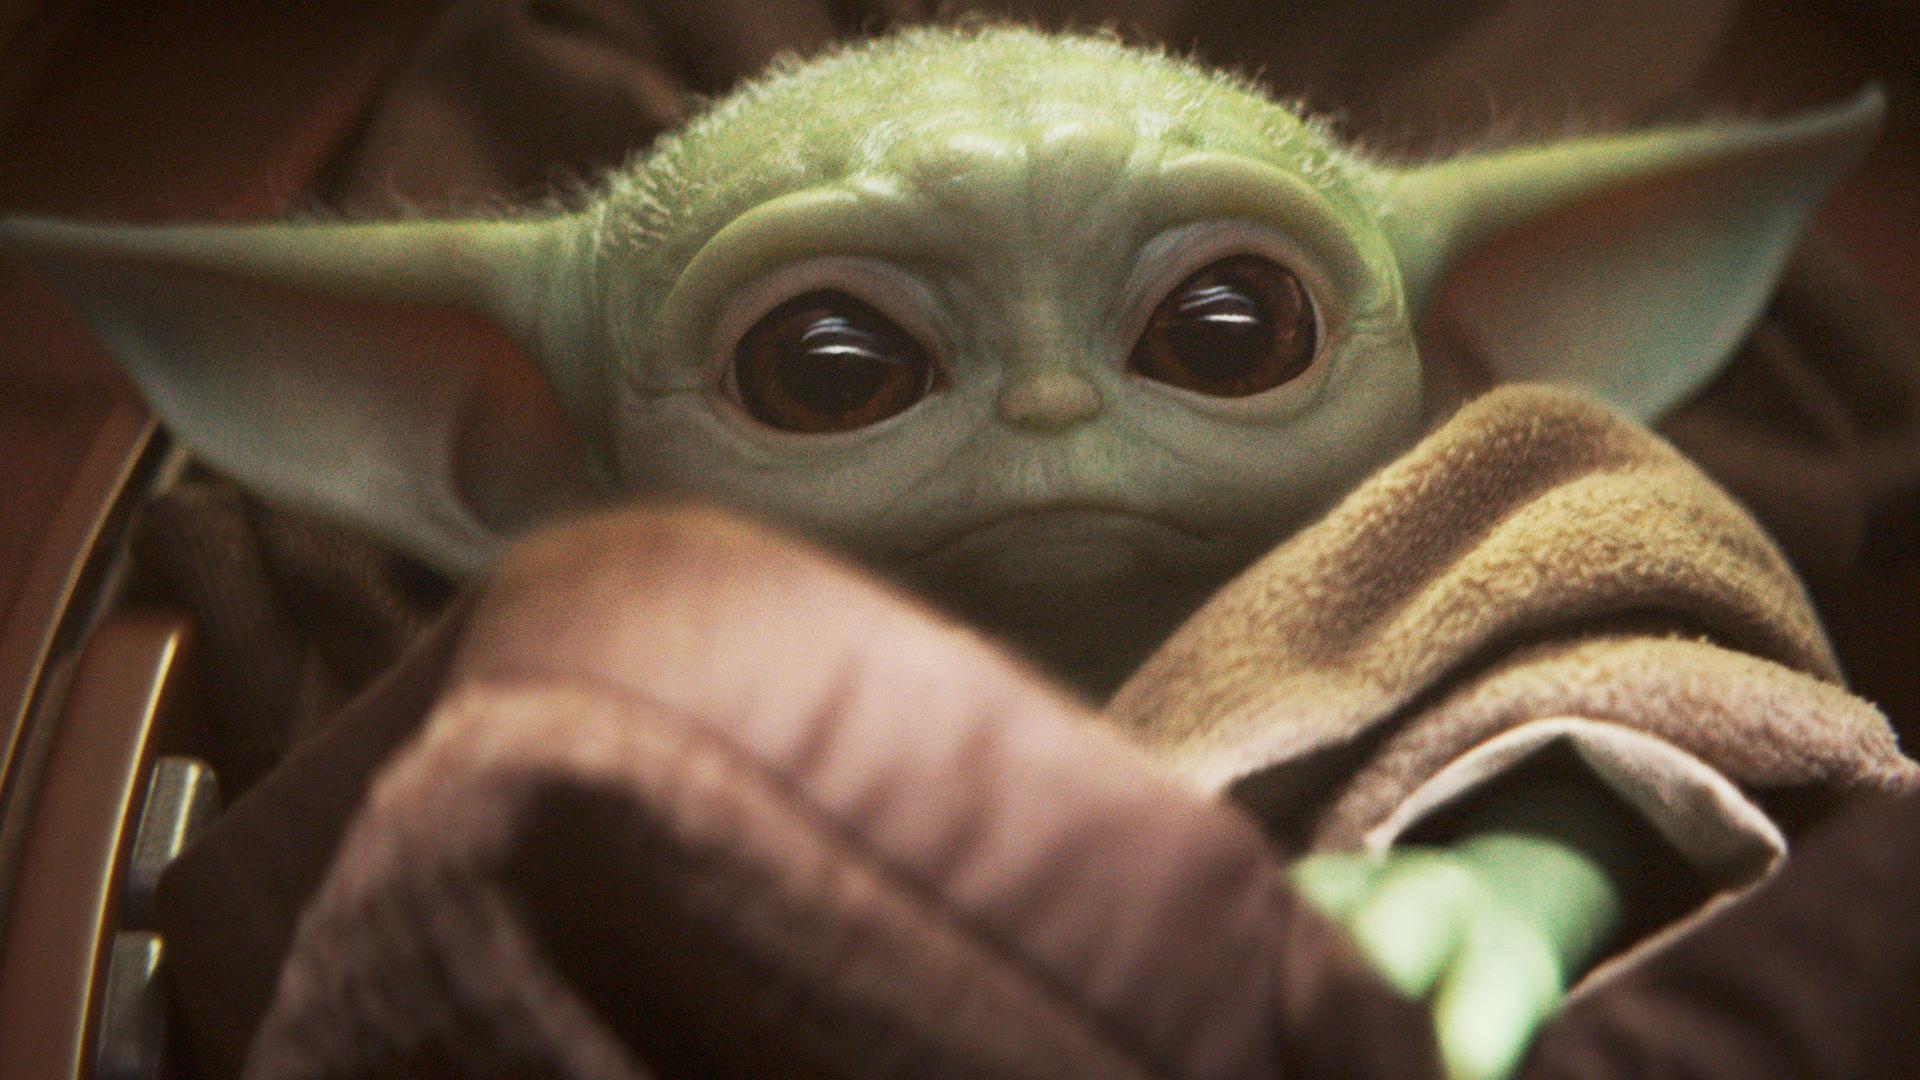 Baby Yoda GIFs are back after 'confusion' led to removal